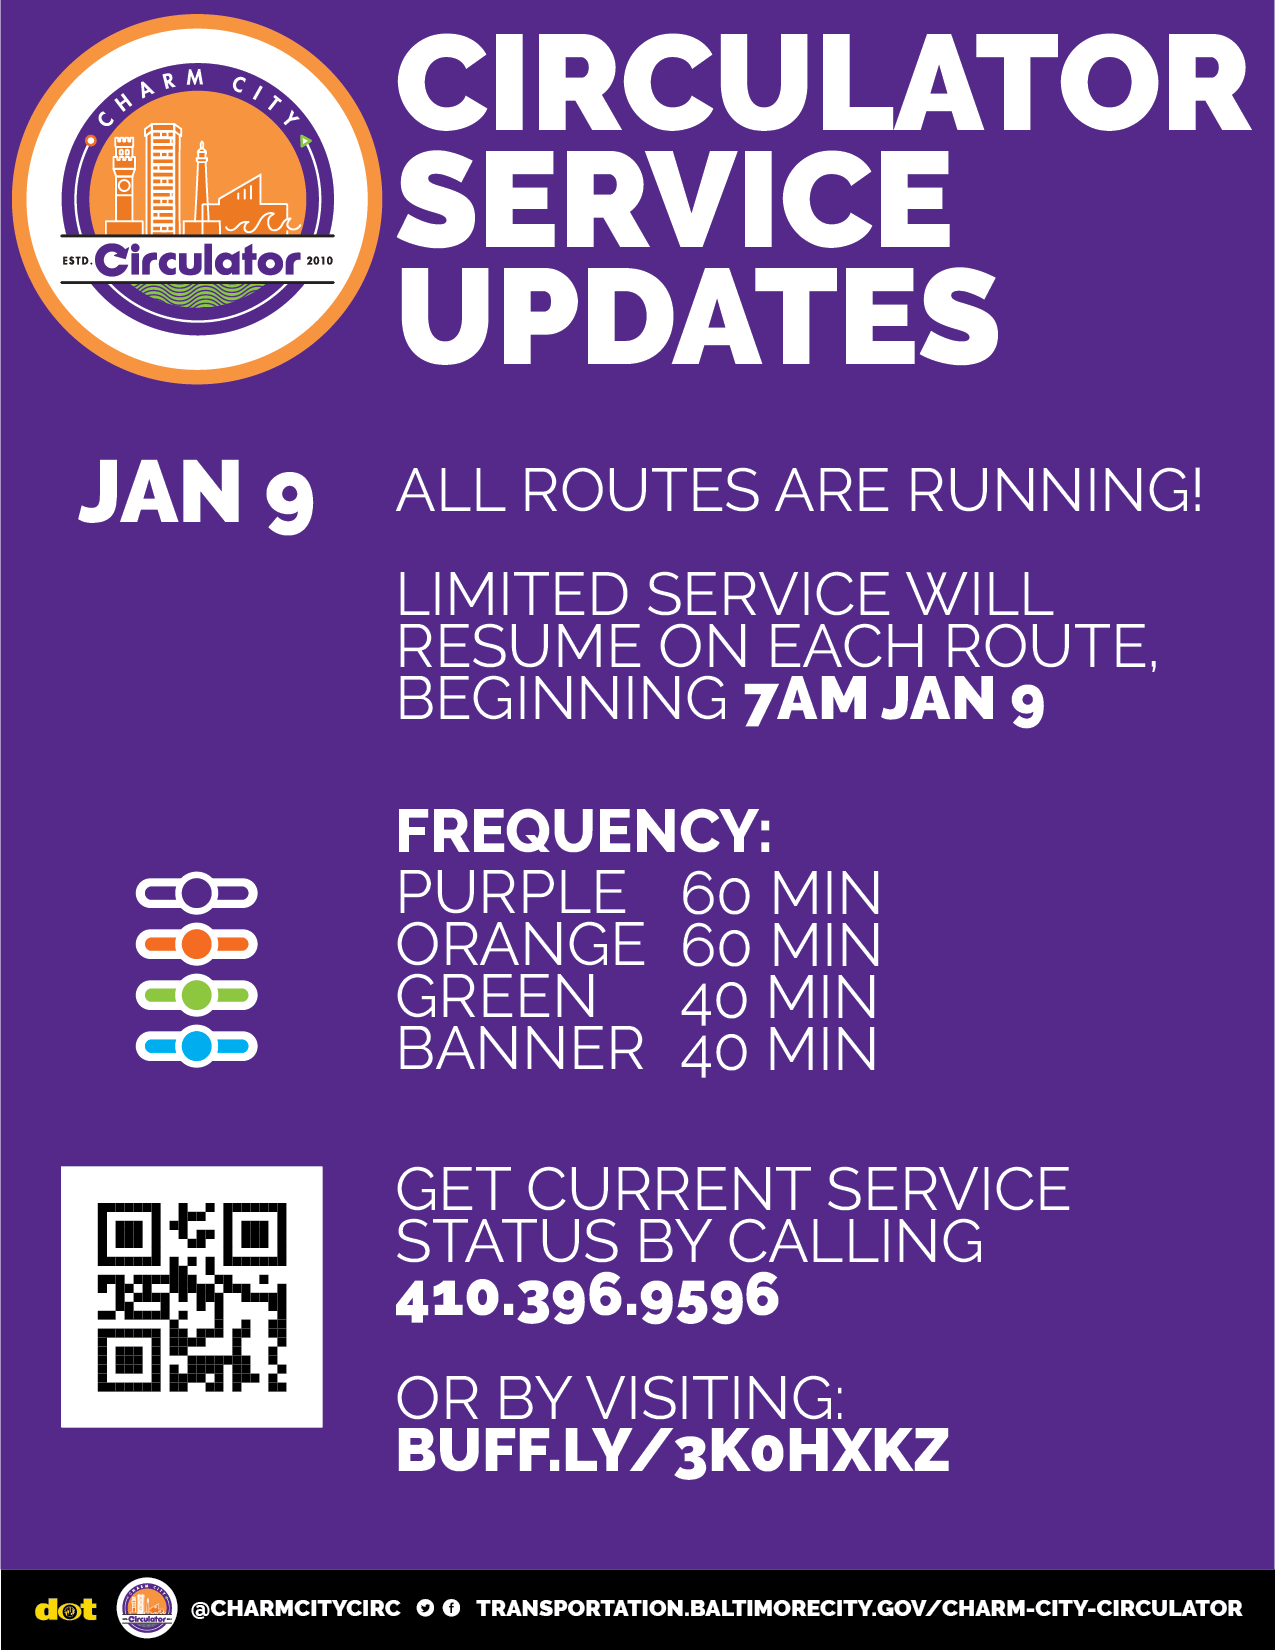 All routes are running!  Limited service will resume on each route, beginning 7am, Jan 9.  Frequency: Orange - 60min Purple - 60min Green - 40min Banner - 40min  Get current service status by calling 410.396.9596